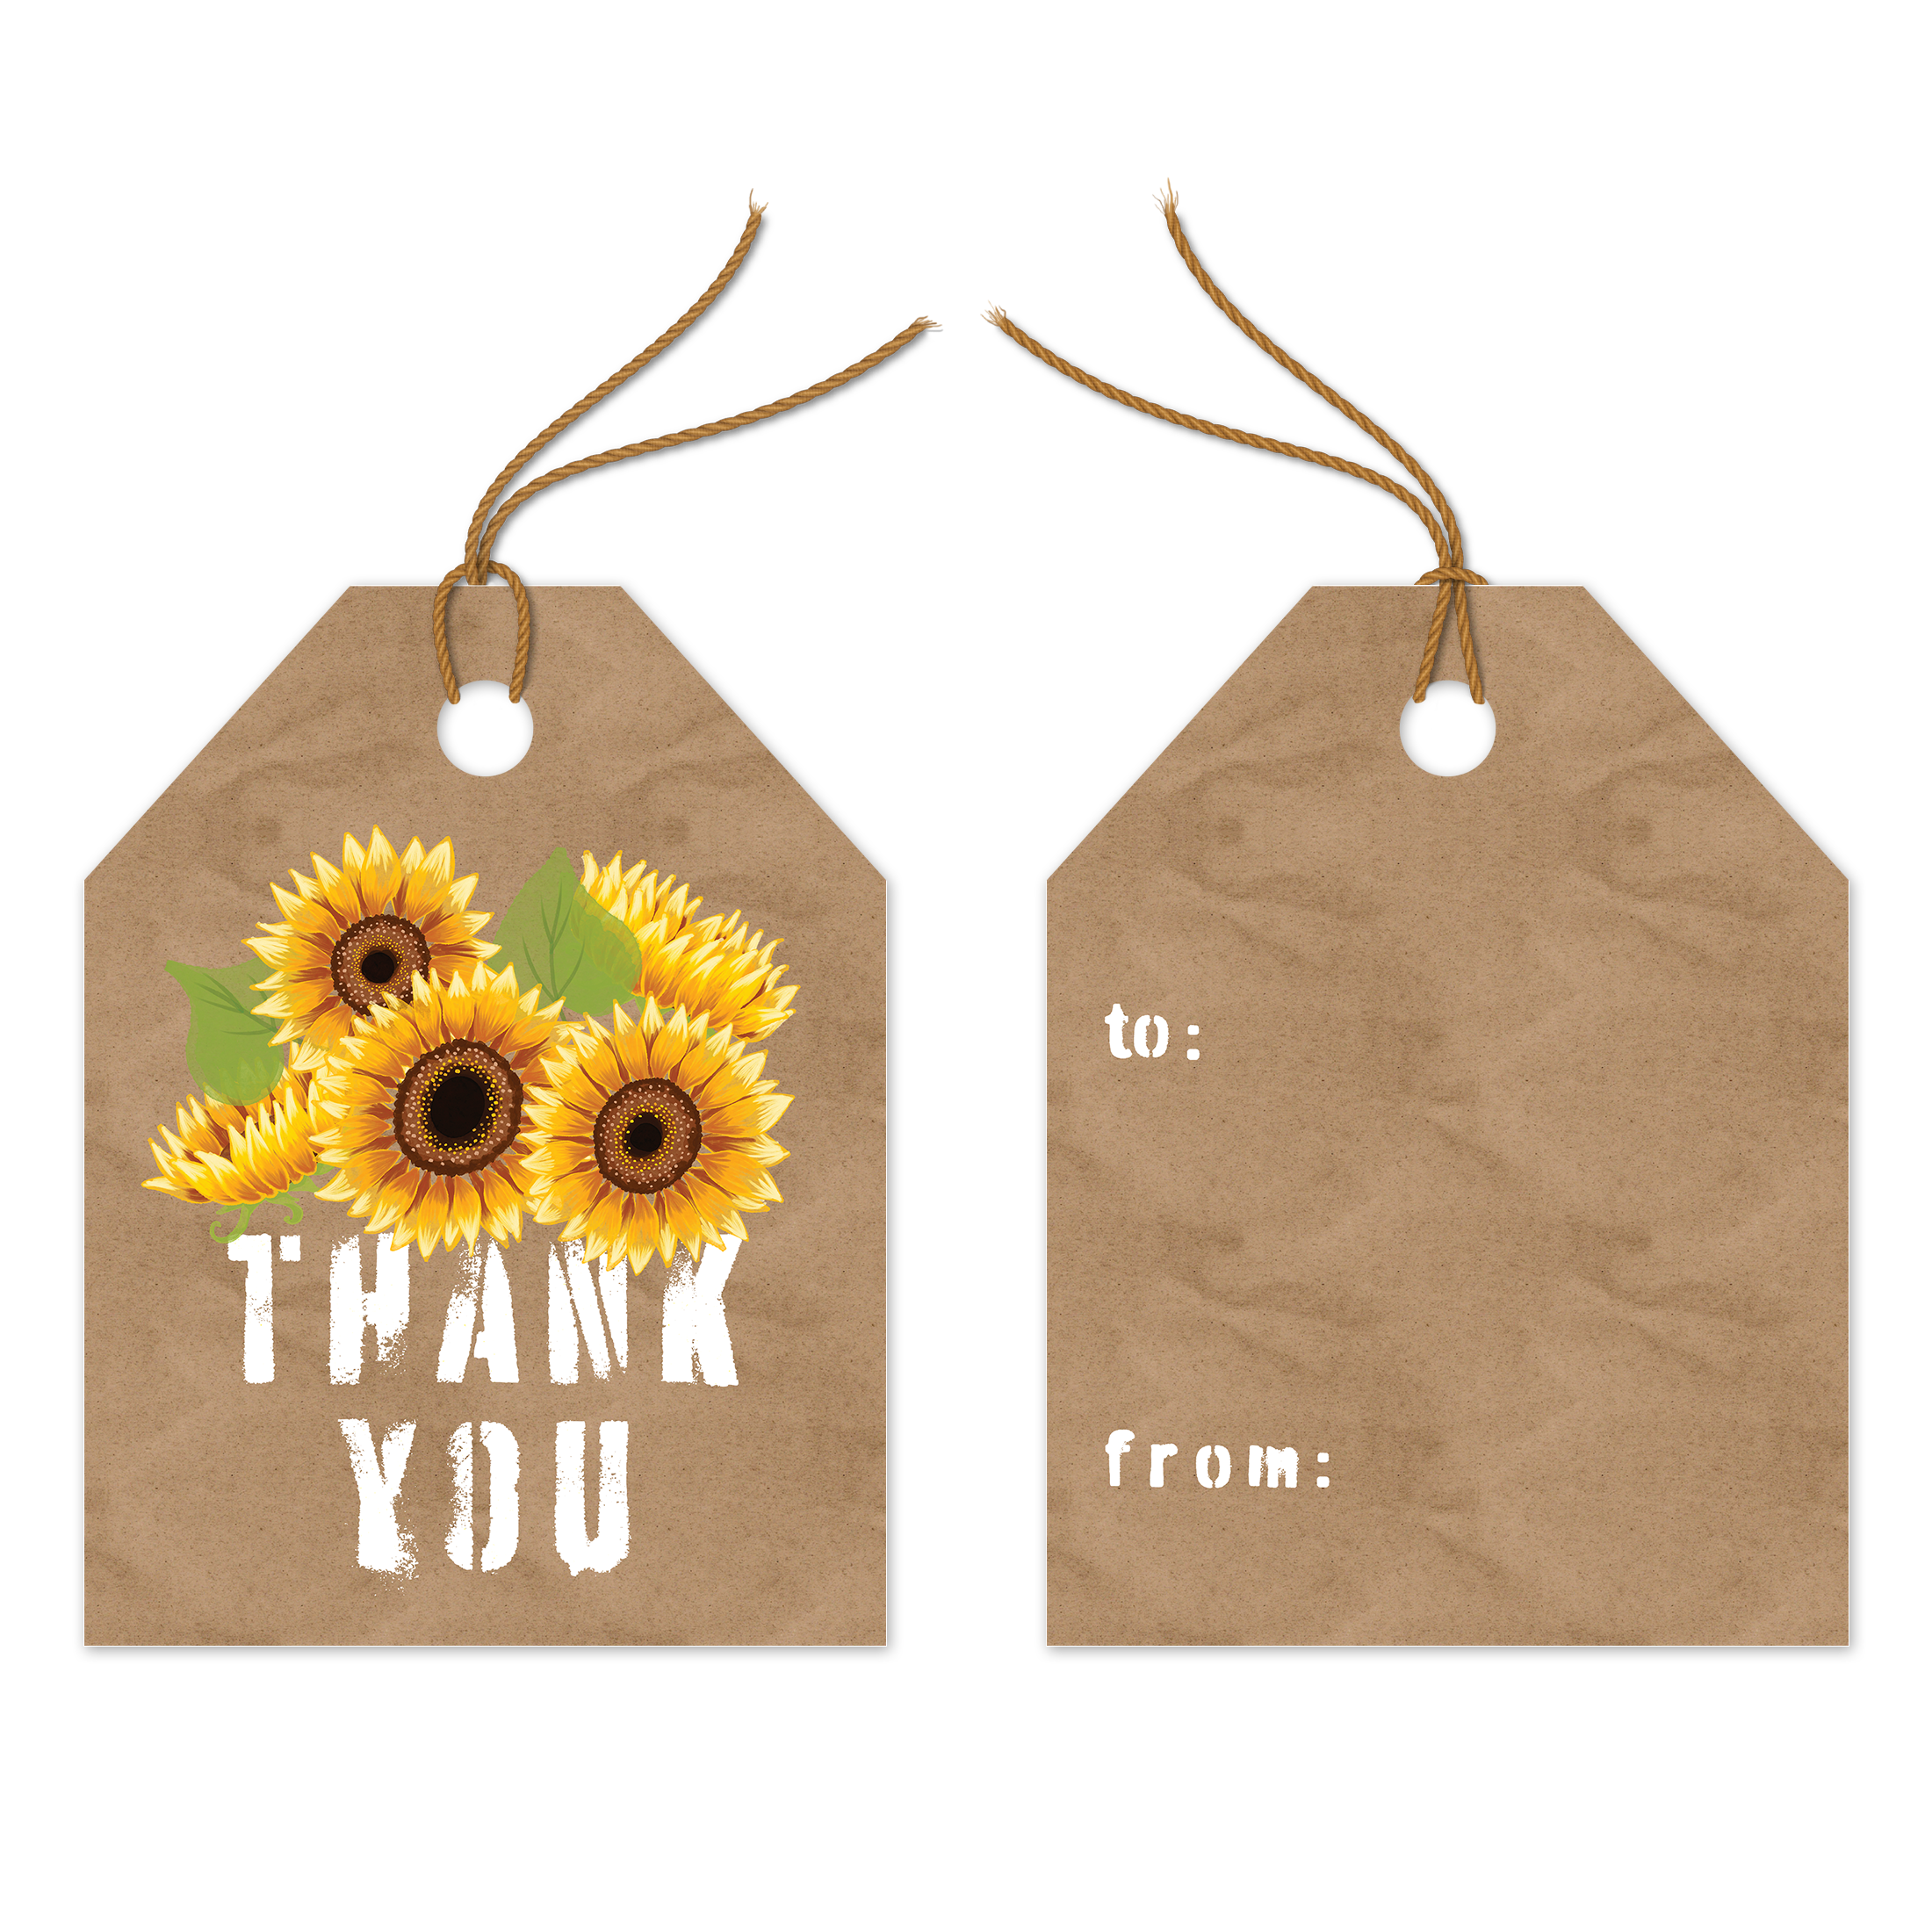 Sunflowers Assortment Gift Tags